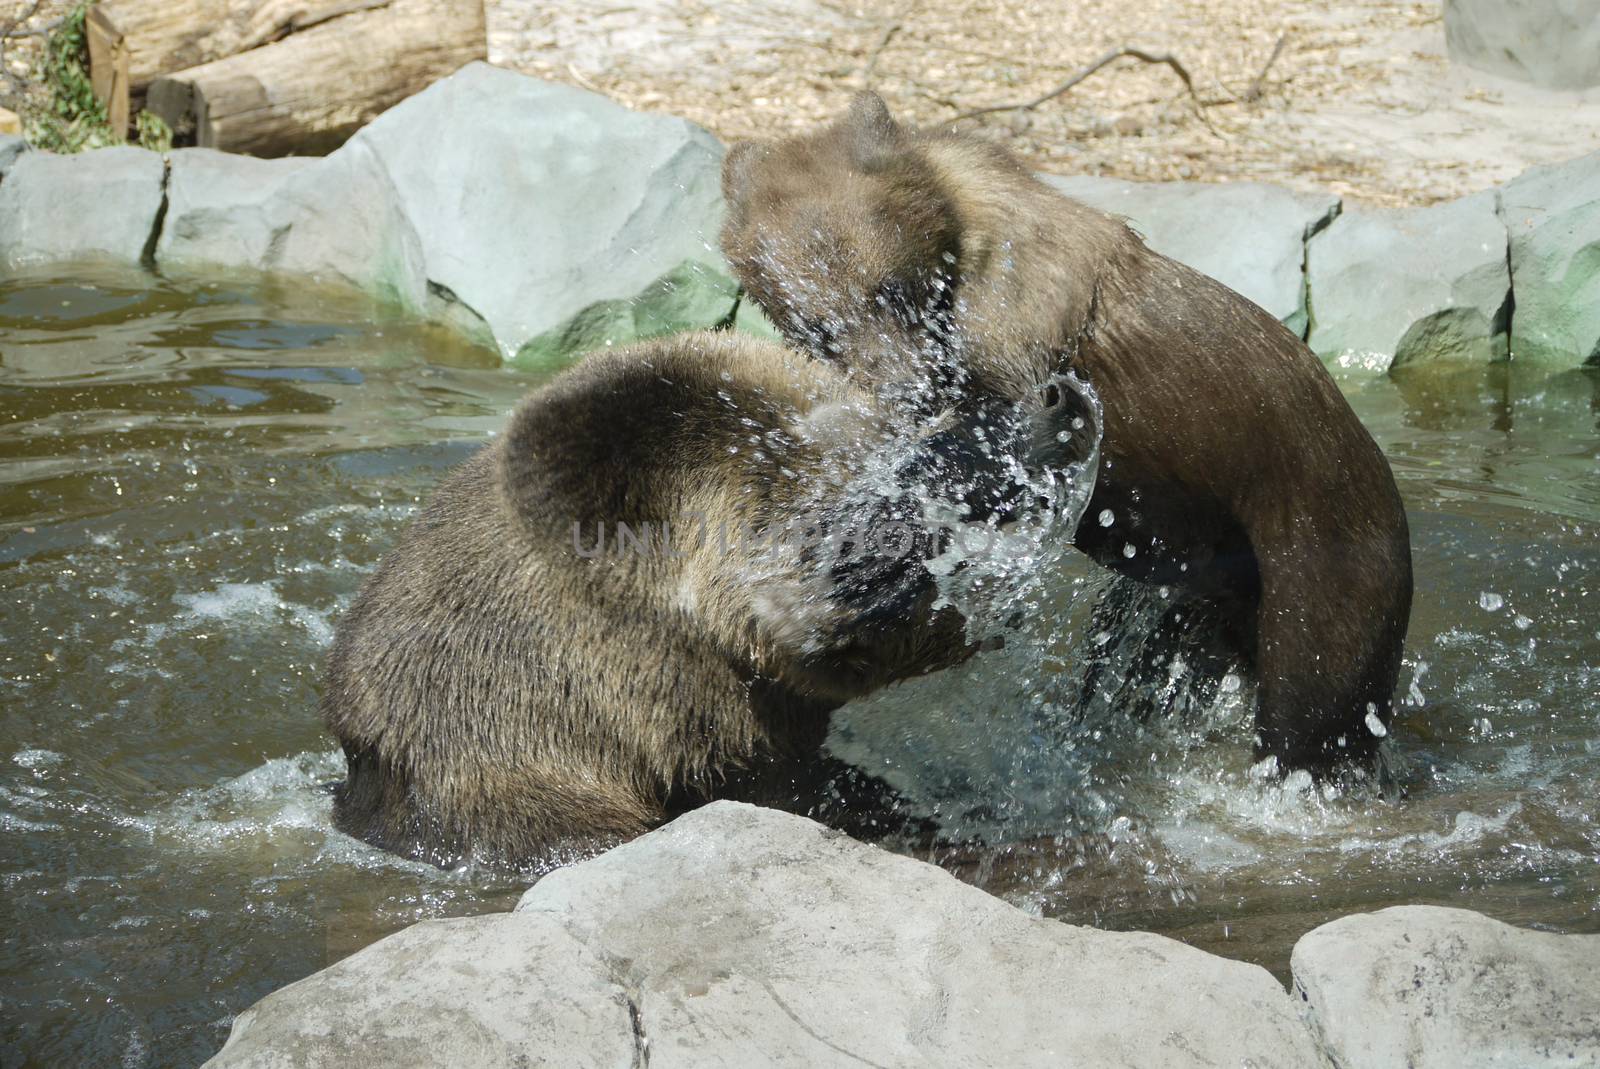 Bears are played with each other in the water against a background of stone blocks by Adamchuk